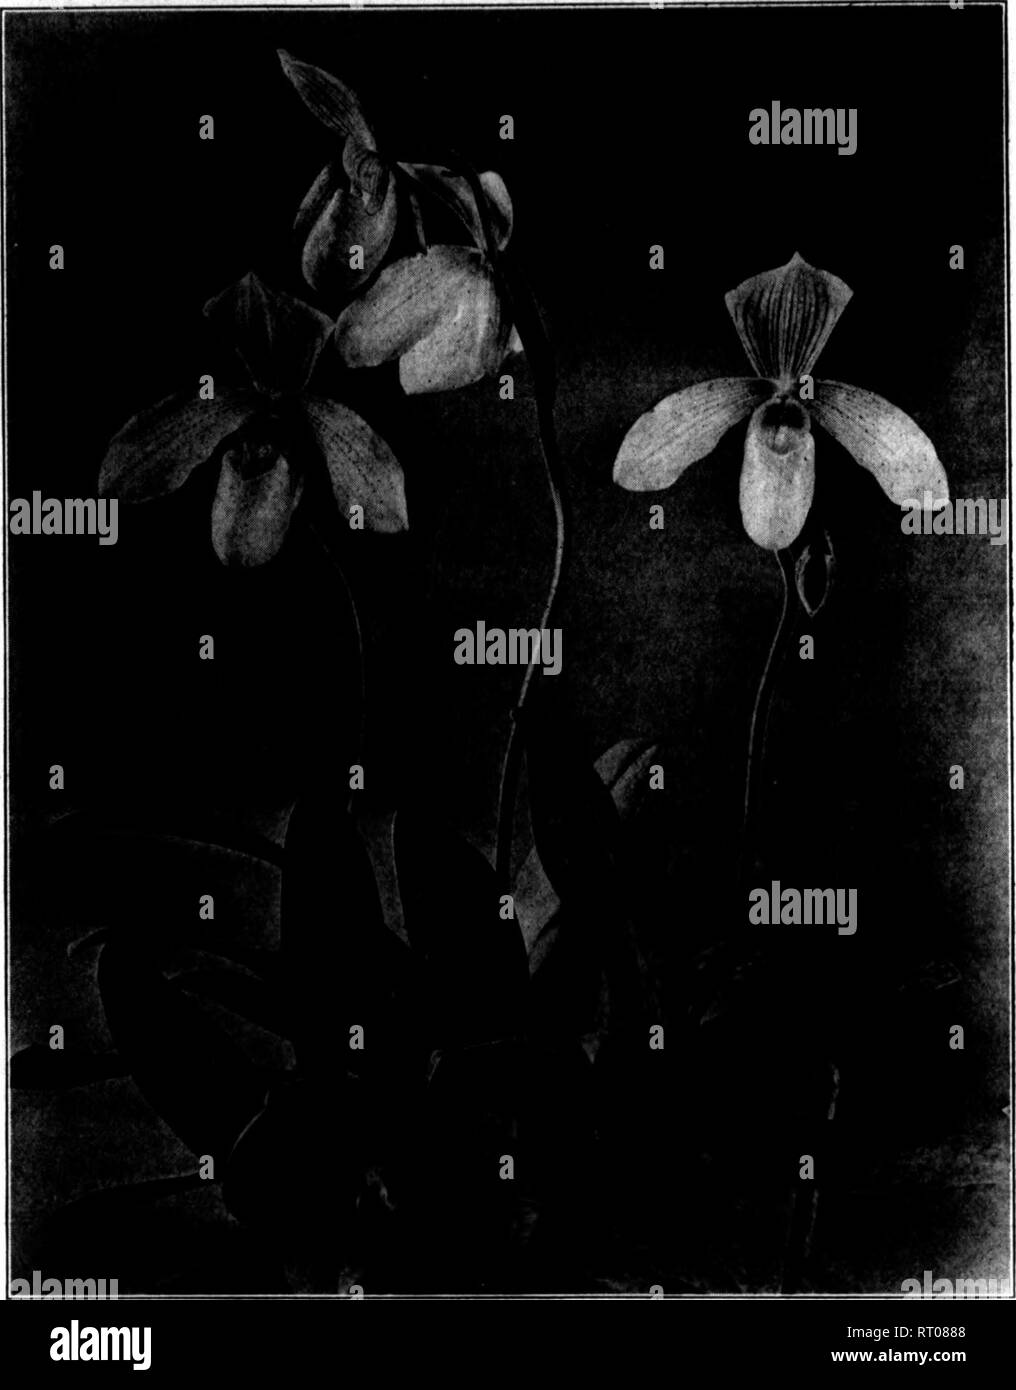 . Florists' review [microform]. Floriculture. Mat so, 1912. The Weekly Florists^ Review^ 15 really well bloomed lycaste is a hard orchid to beat even today. Cattleya Mossise. The free blooming and universally popular cattleya, C. Mossise, is now in season and will provide flowers in abundance for some weeks to come. It is so inexpensive and of such easy culture that no one able to grow cat- tleyas at all need be afraid to try it. While the plants are in flower, give them the coolest and shadiest part of the house and avoid spraying them while in bloom, for fear of spotting the flowers. There i Stock Photo